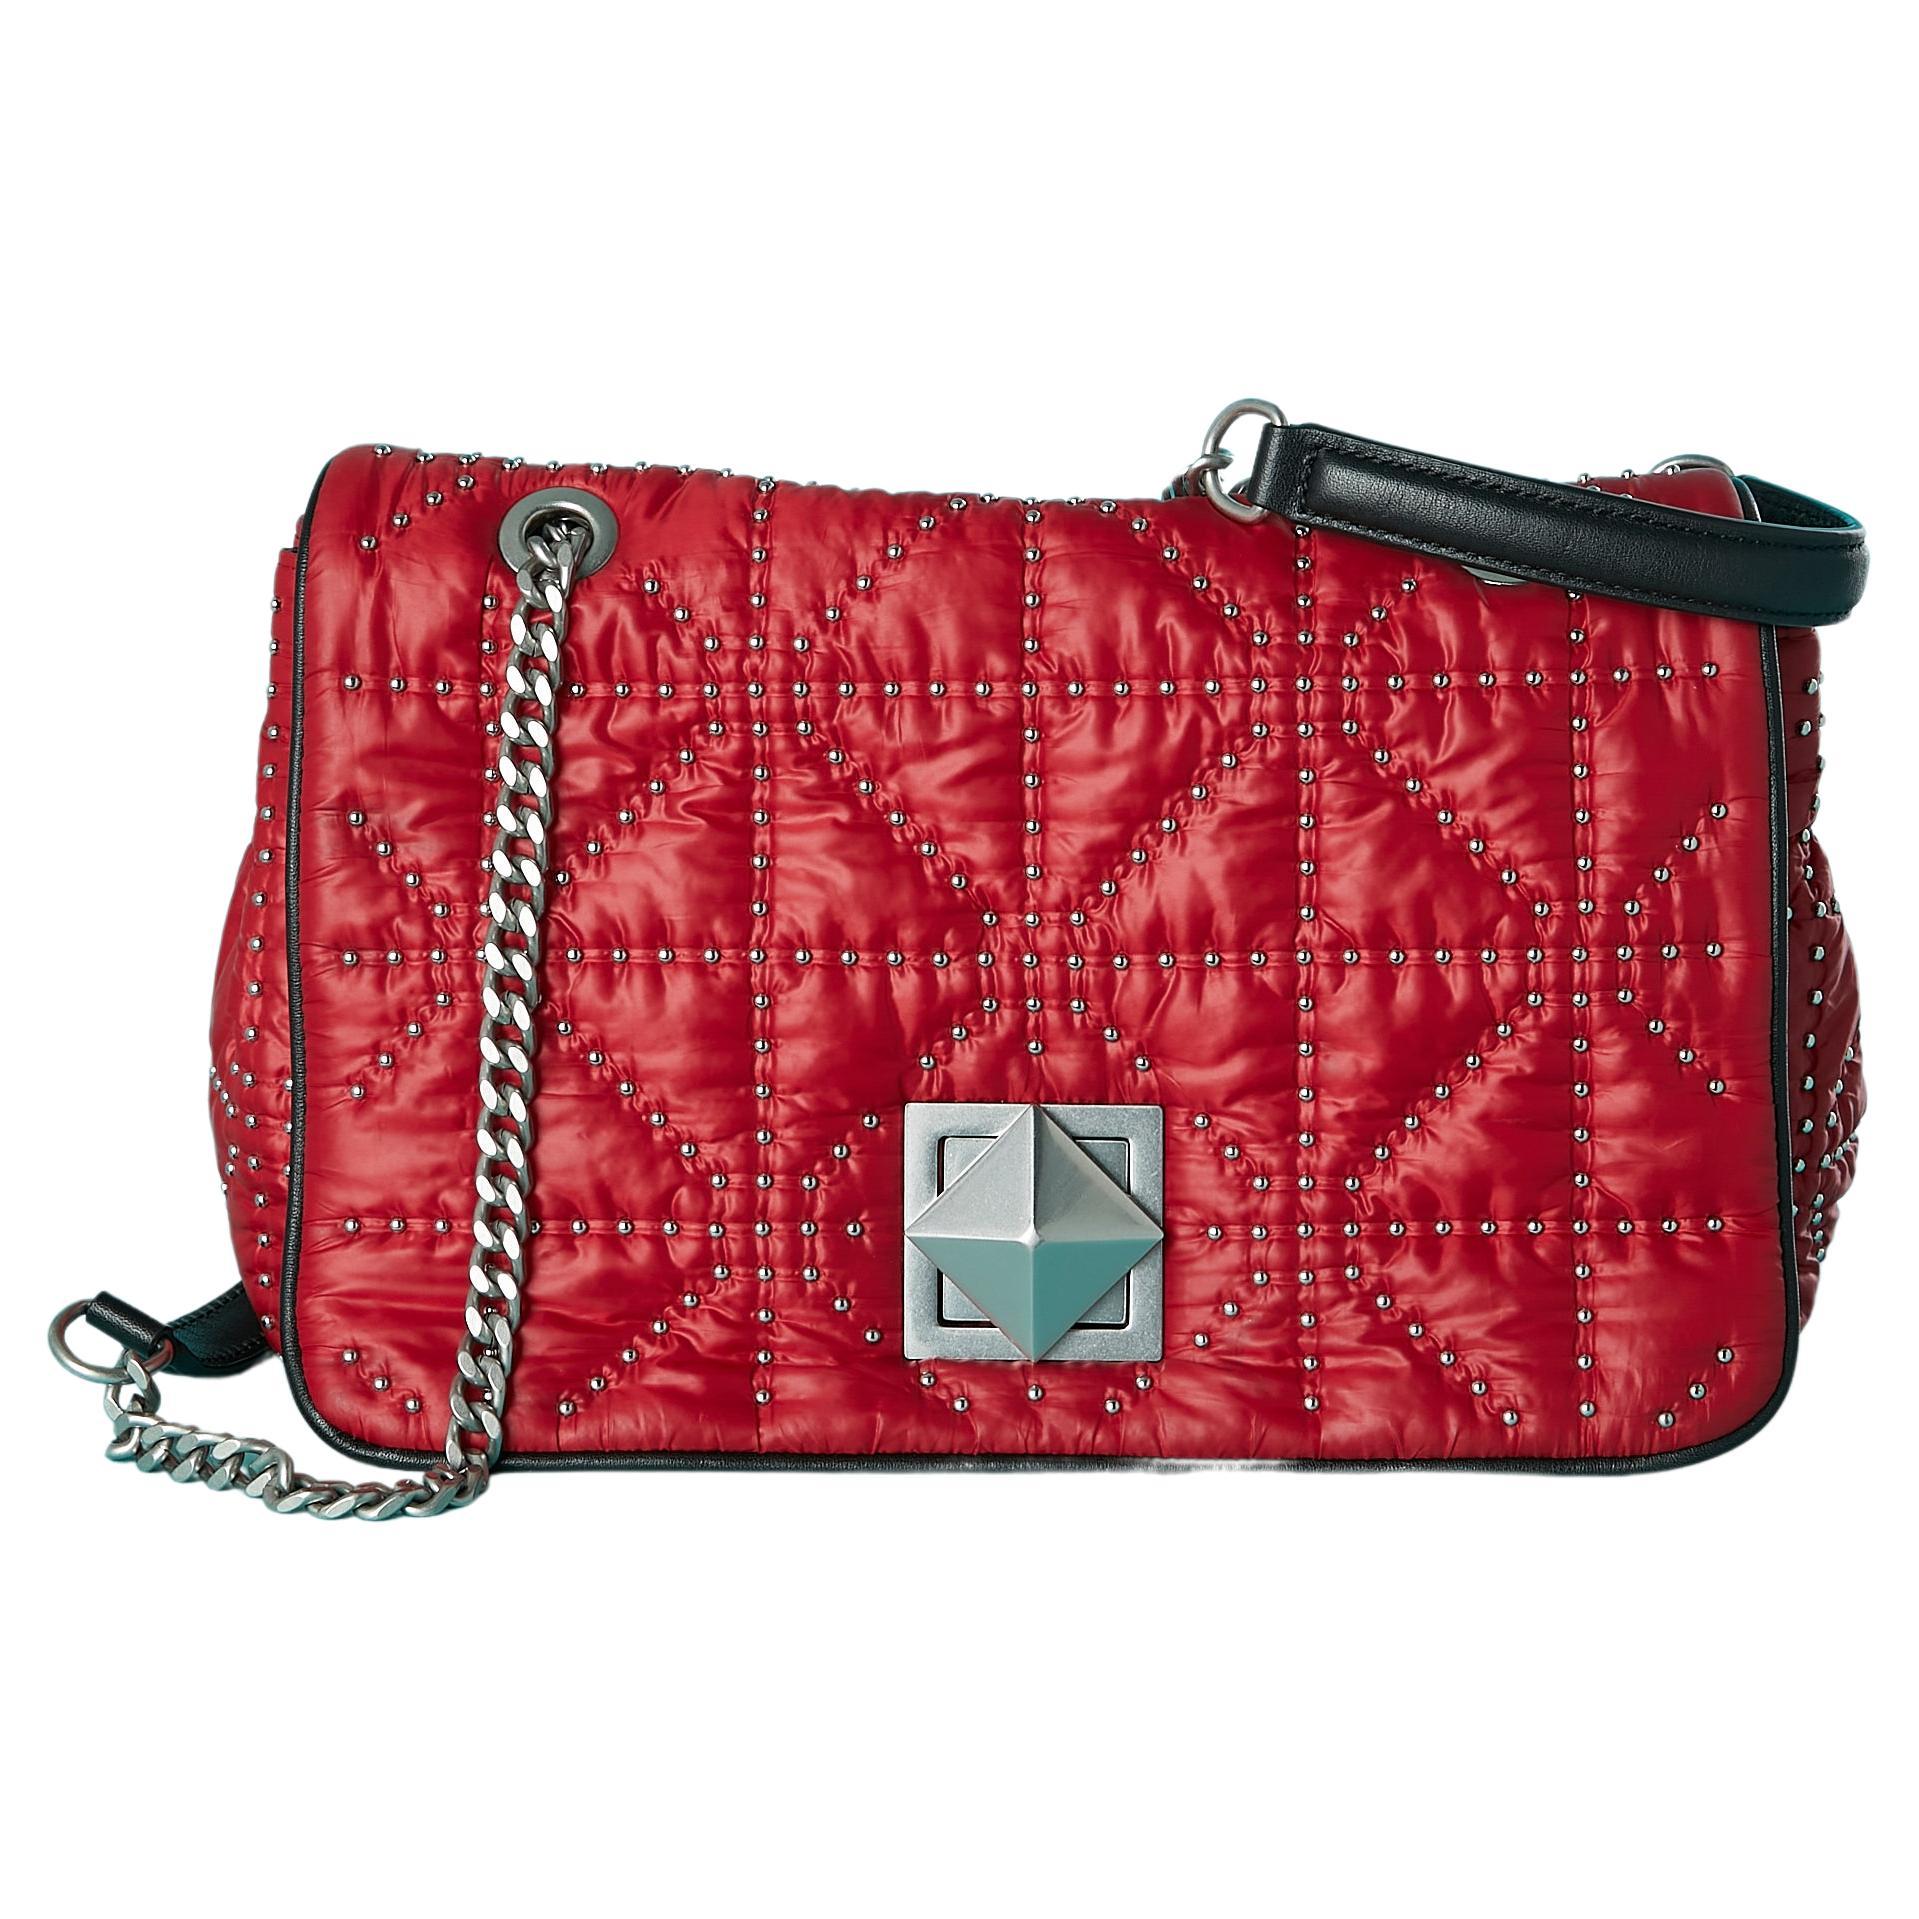  Red shoulder bag with tiny silver studs Sonia Rykiel Circa 2000's  For Sale